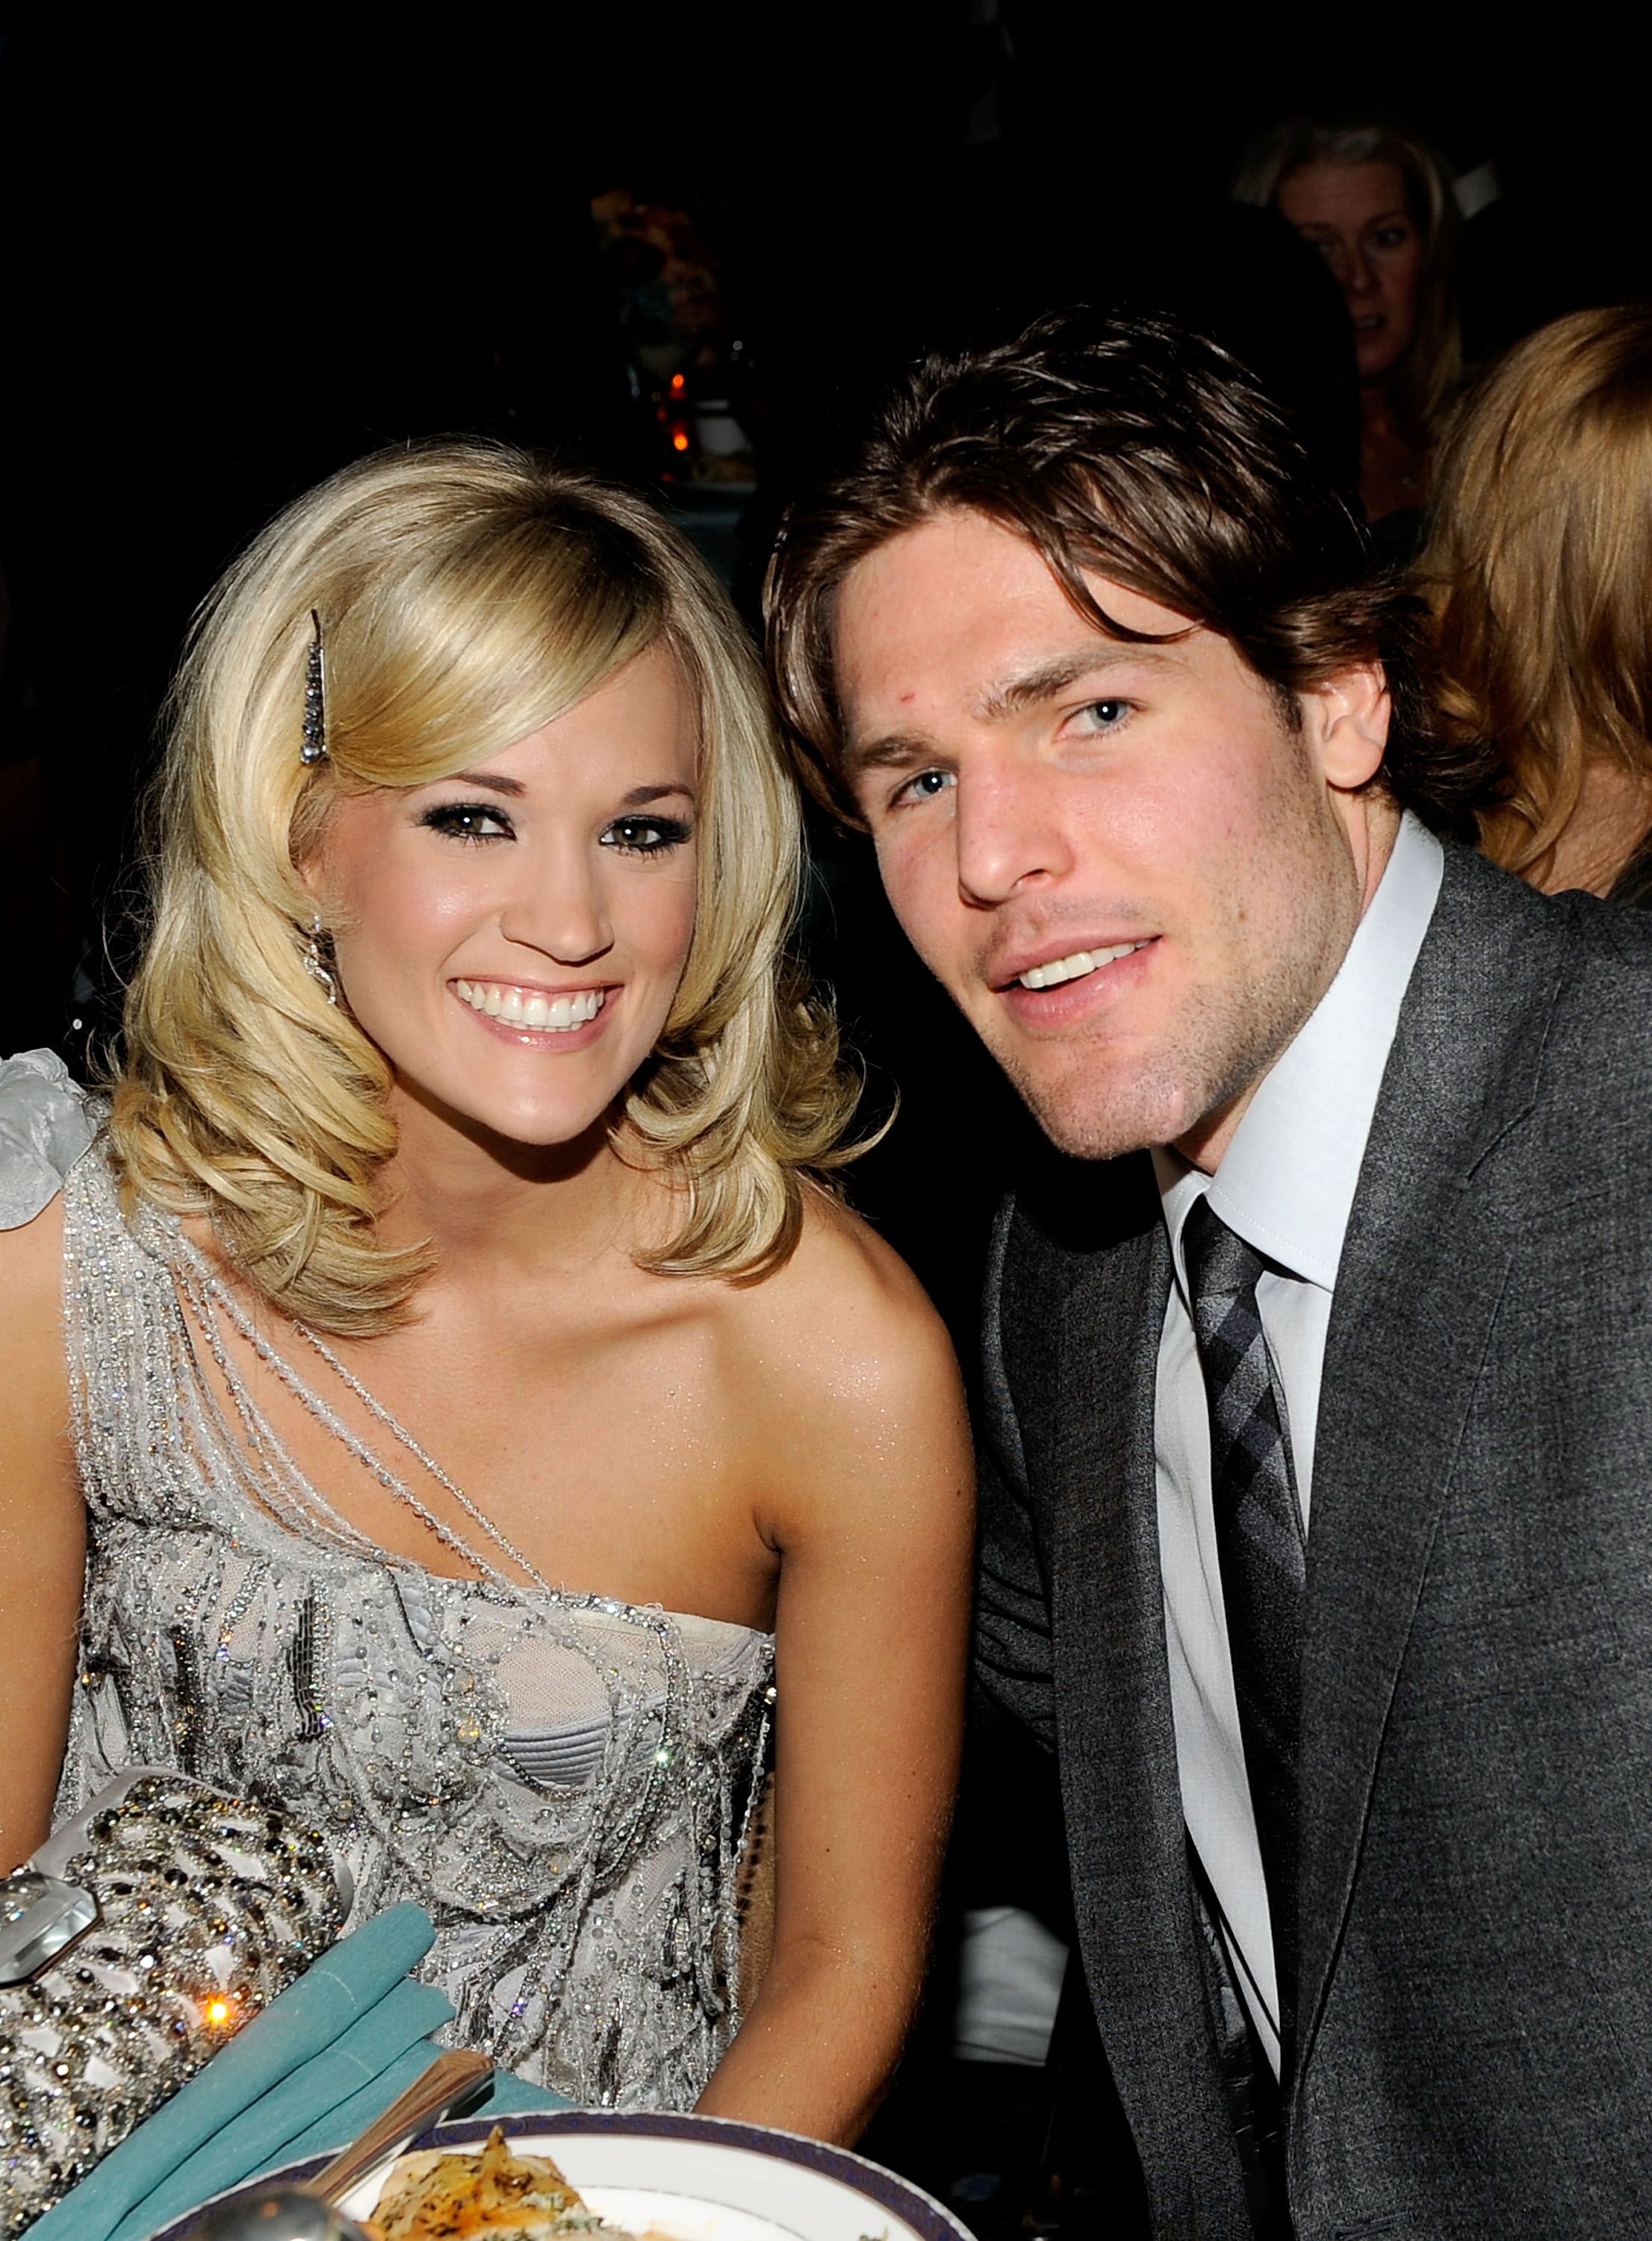 Carrie Underwood and Mike Fisher attend the Grammy Awards, 2010. | Source: Getty Images